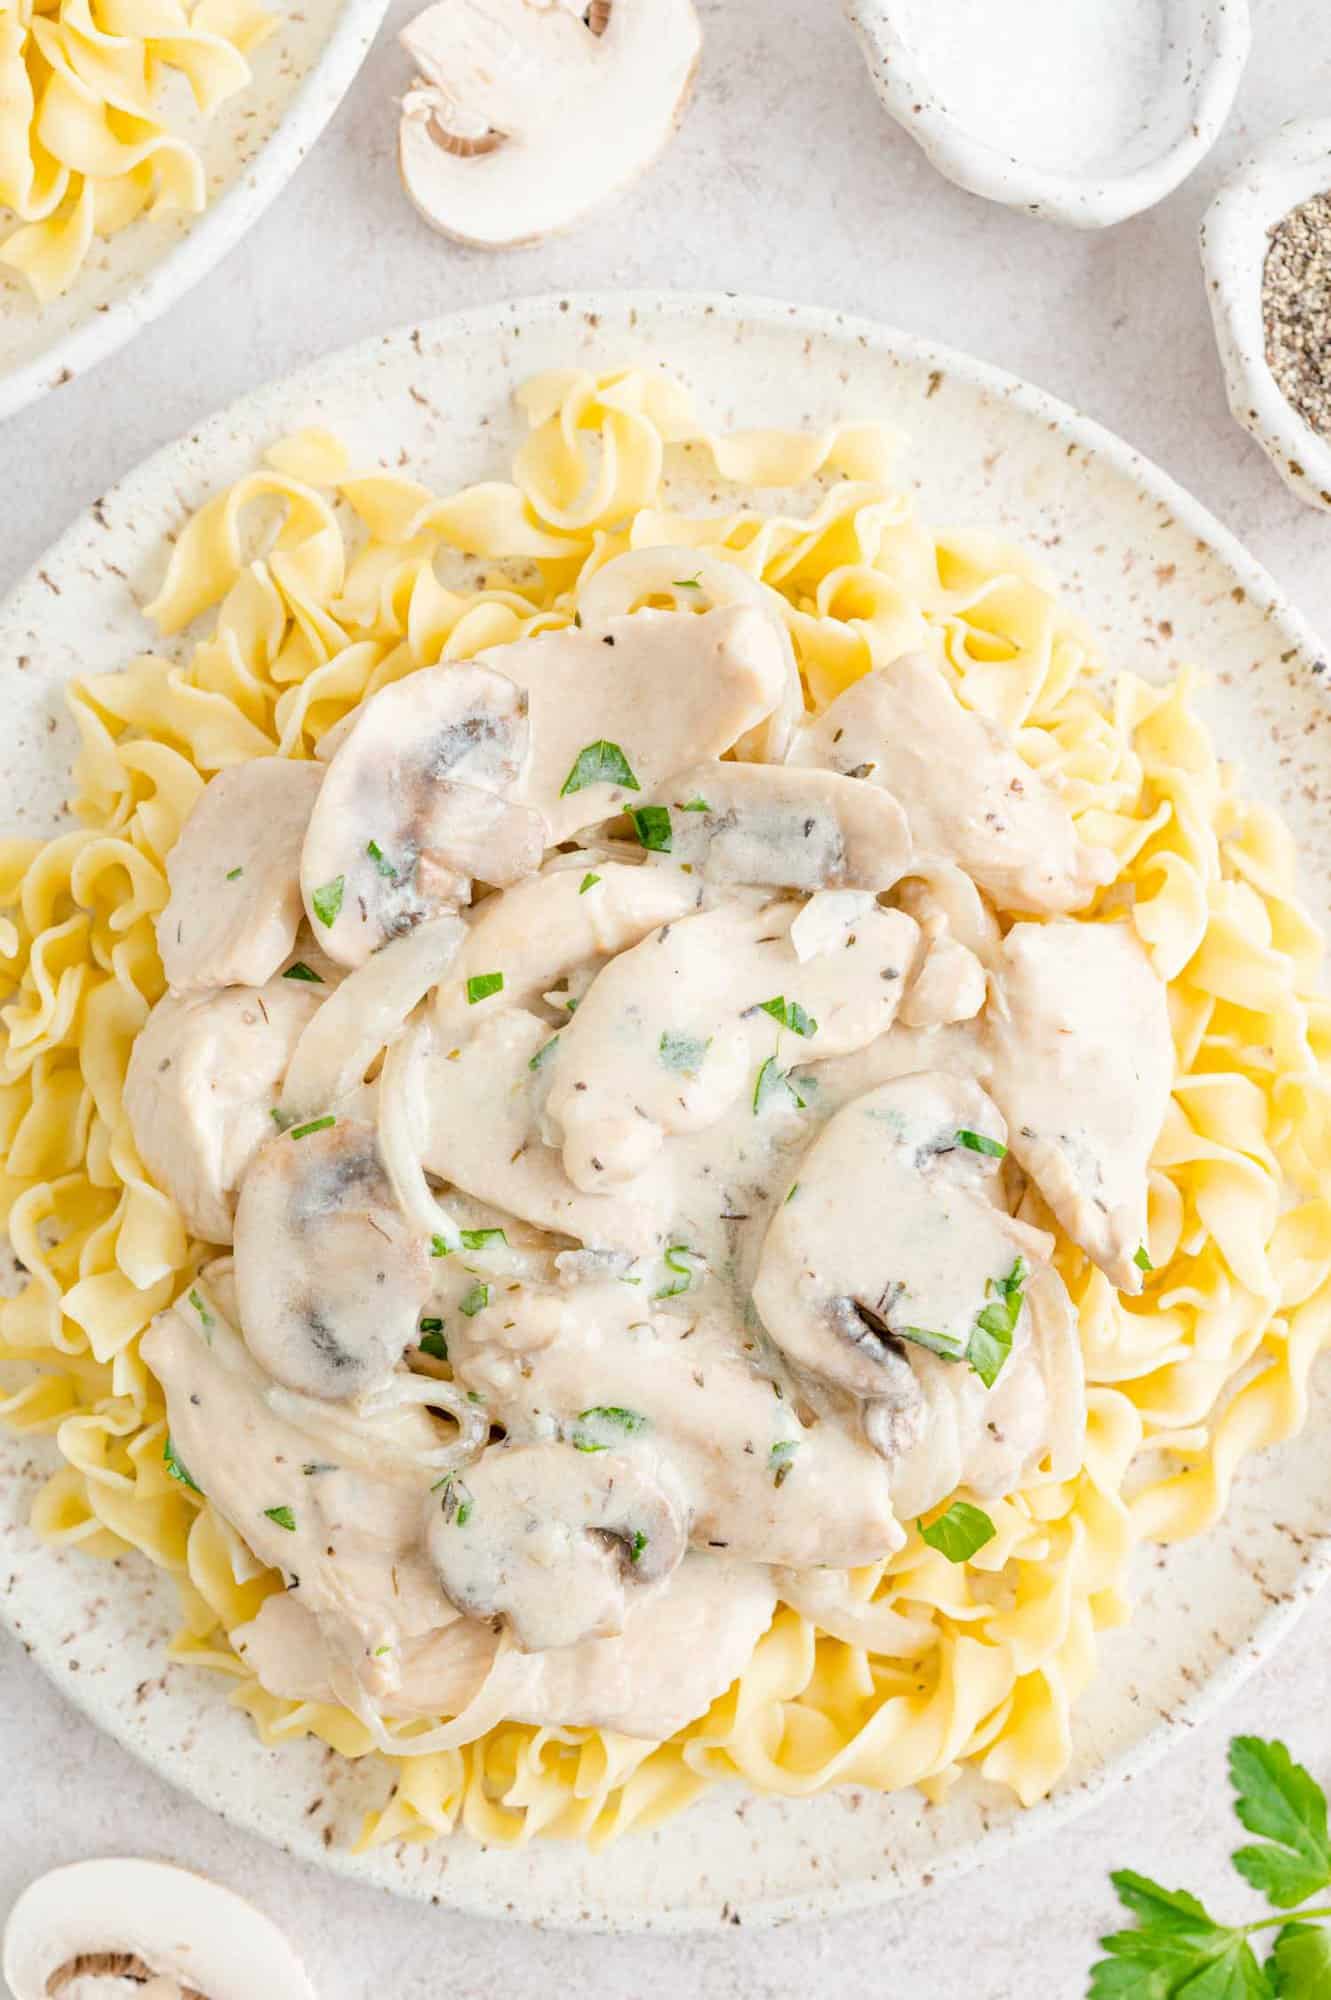 Chicken stroganoff with mushrooms on a plate with noodles.